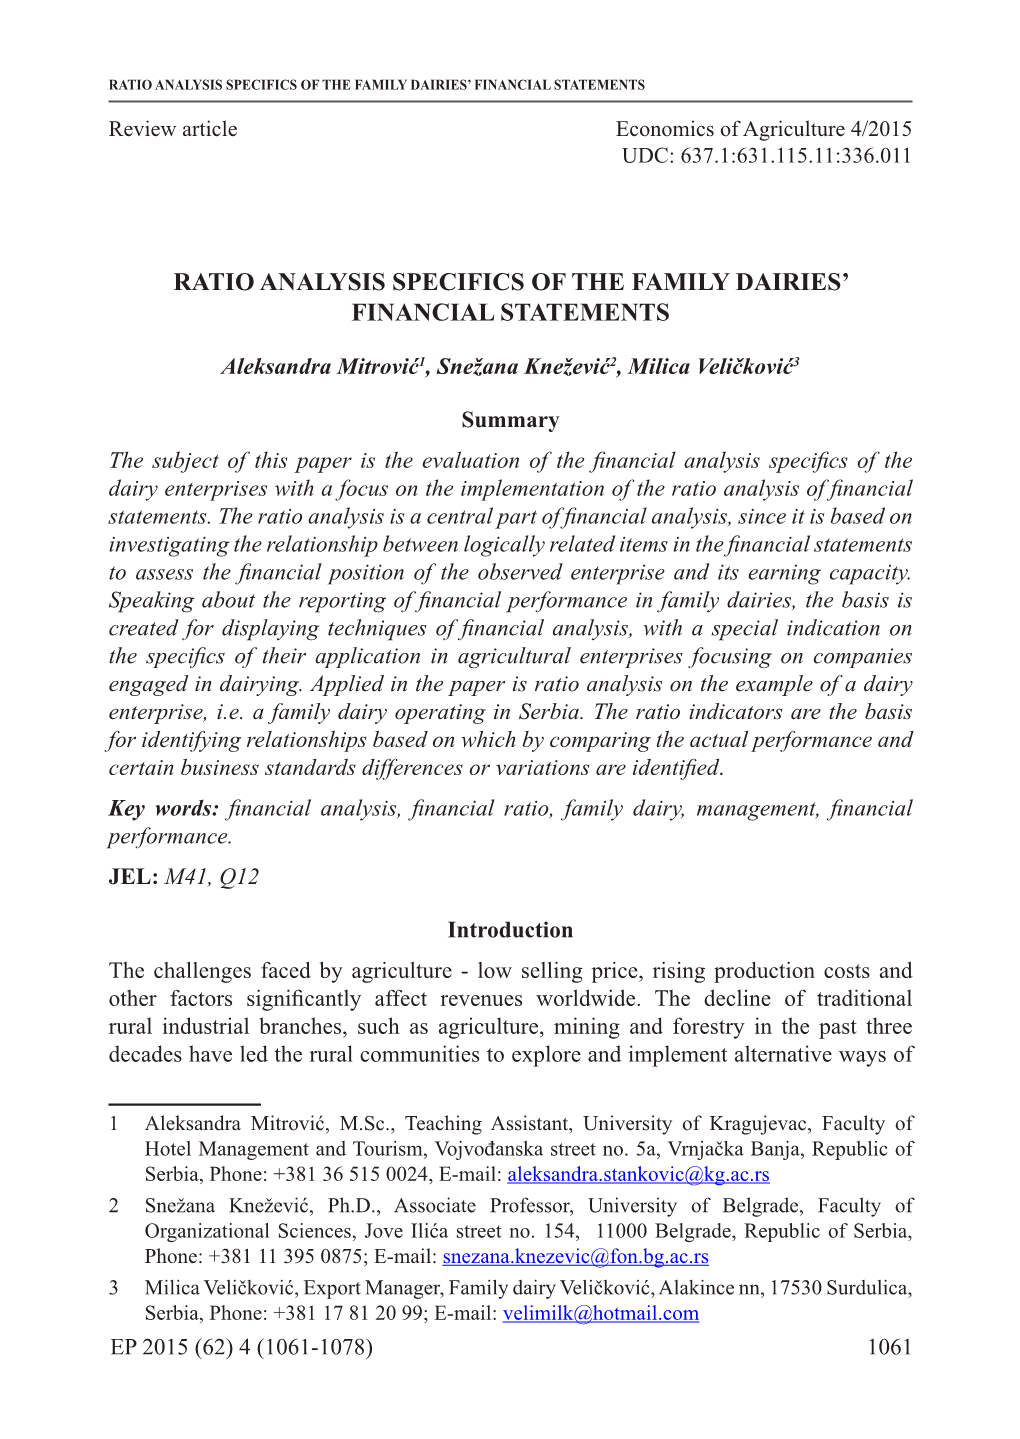 Ratio Analysis Specifics of the Family Dairies' Financial